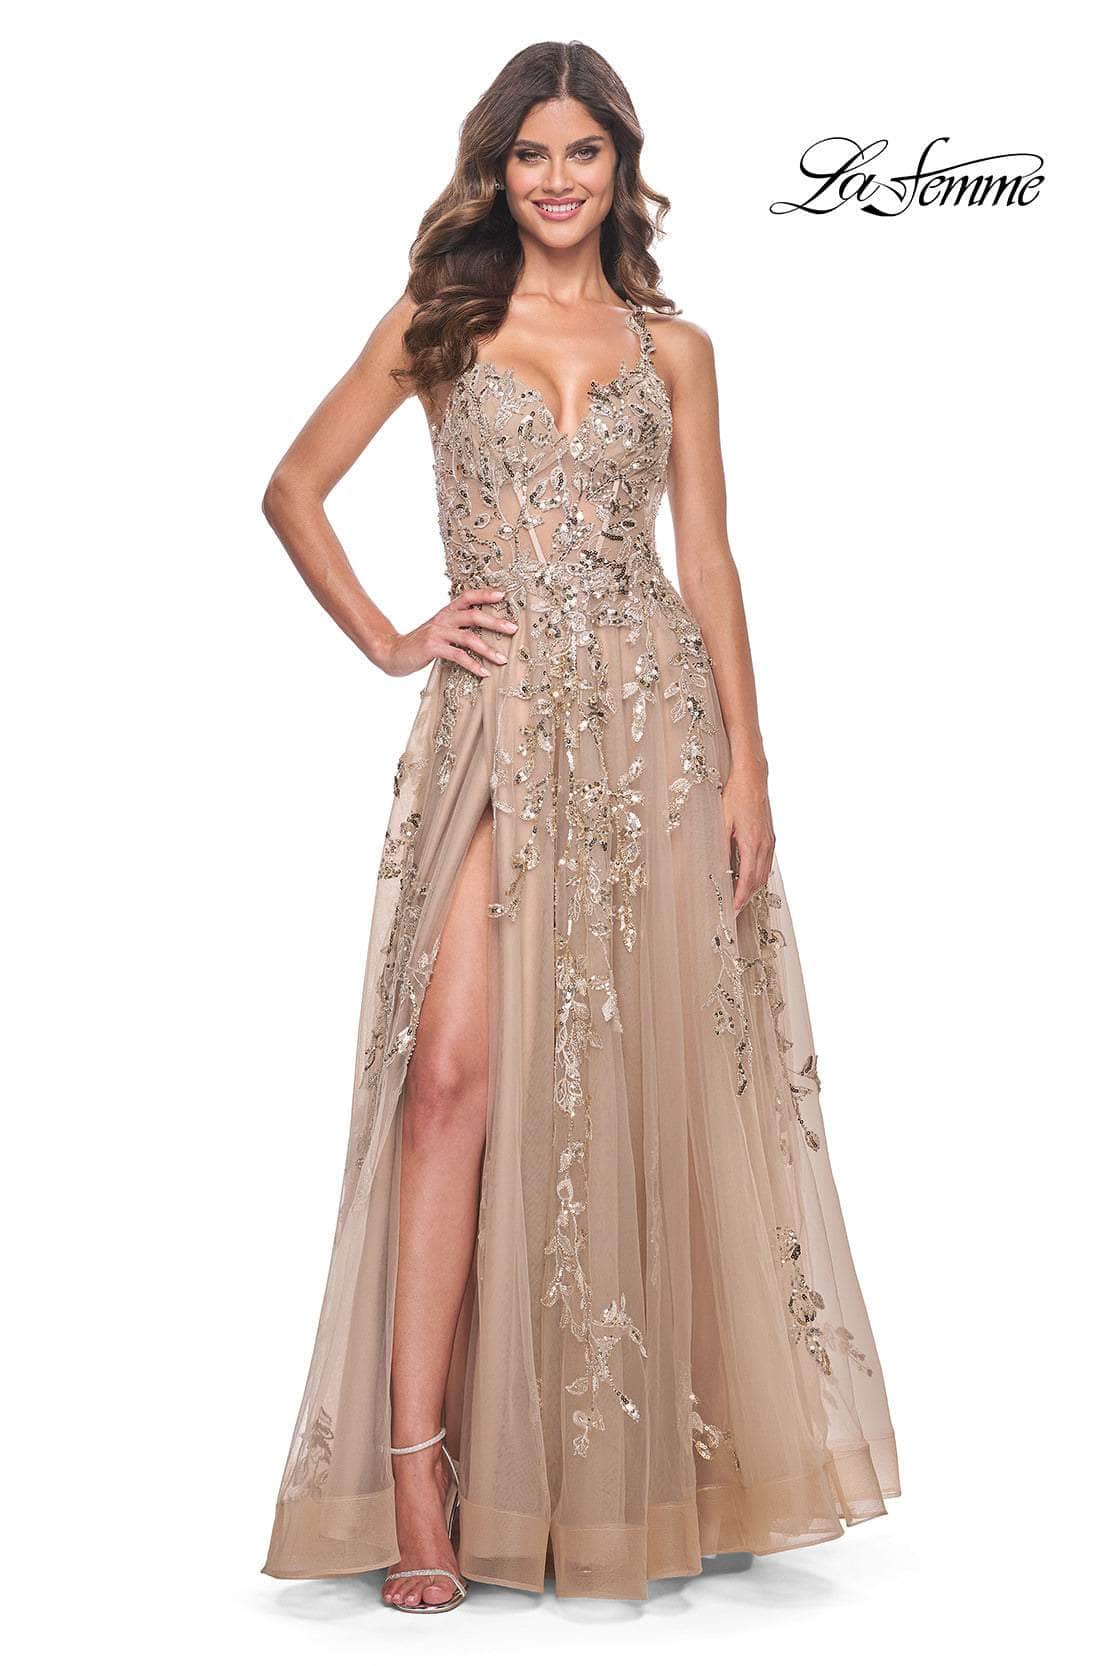 La Femme 32052 - Sleeveless Sequin Lace Prom Gown
